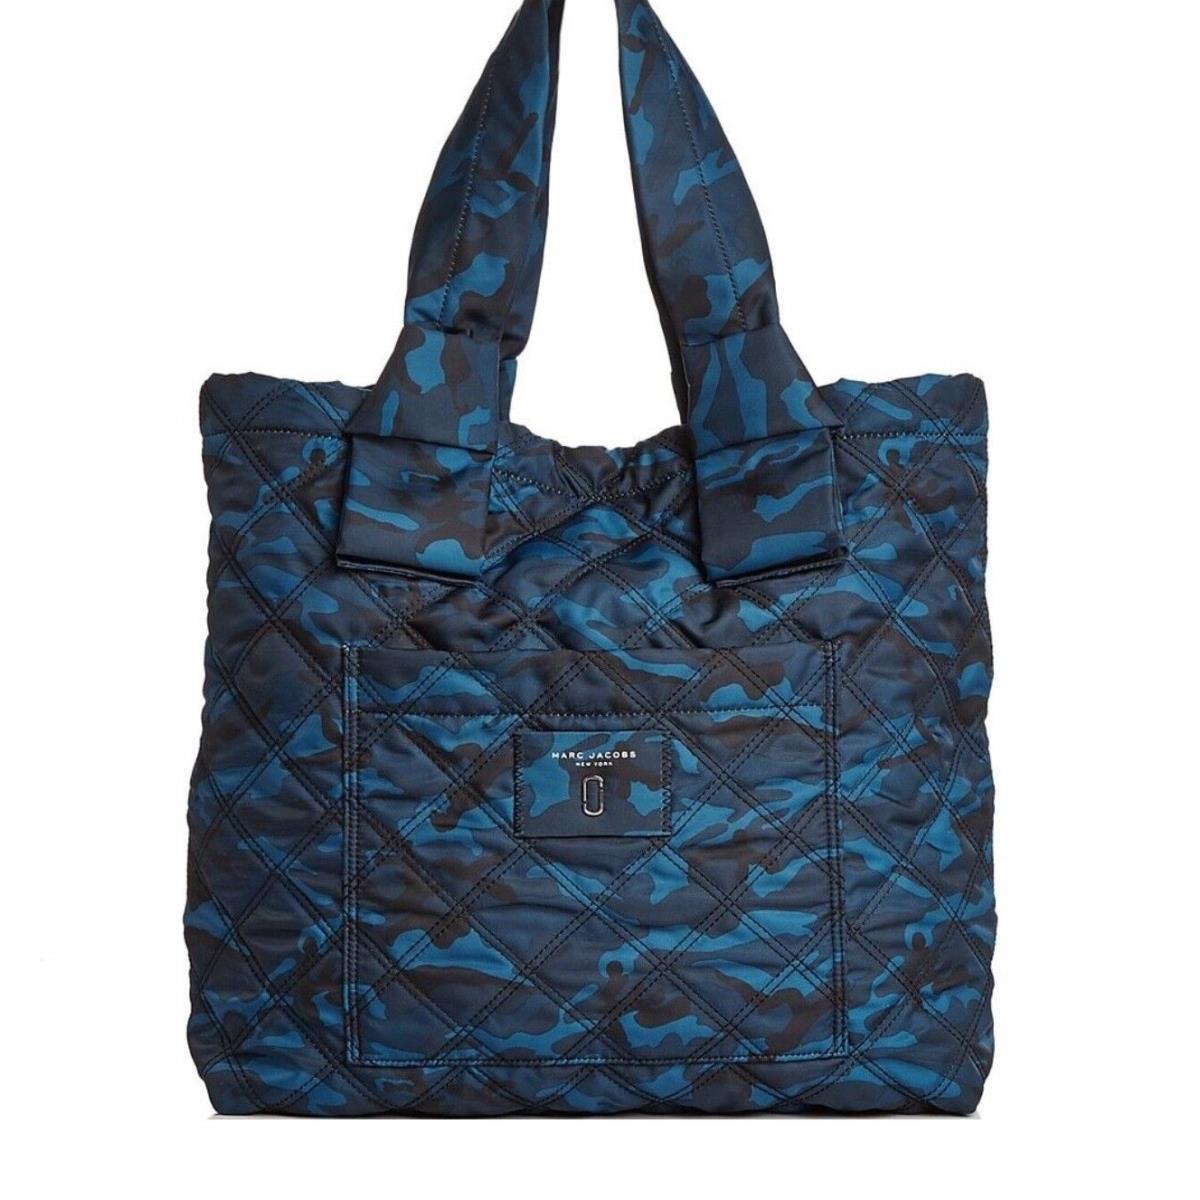 Marc Jacobs Quilted Knot Camo Print Nylon Tote Blue / Black Dust Bag